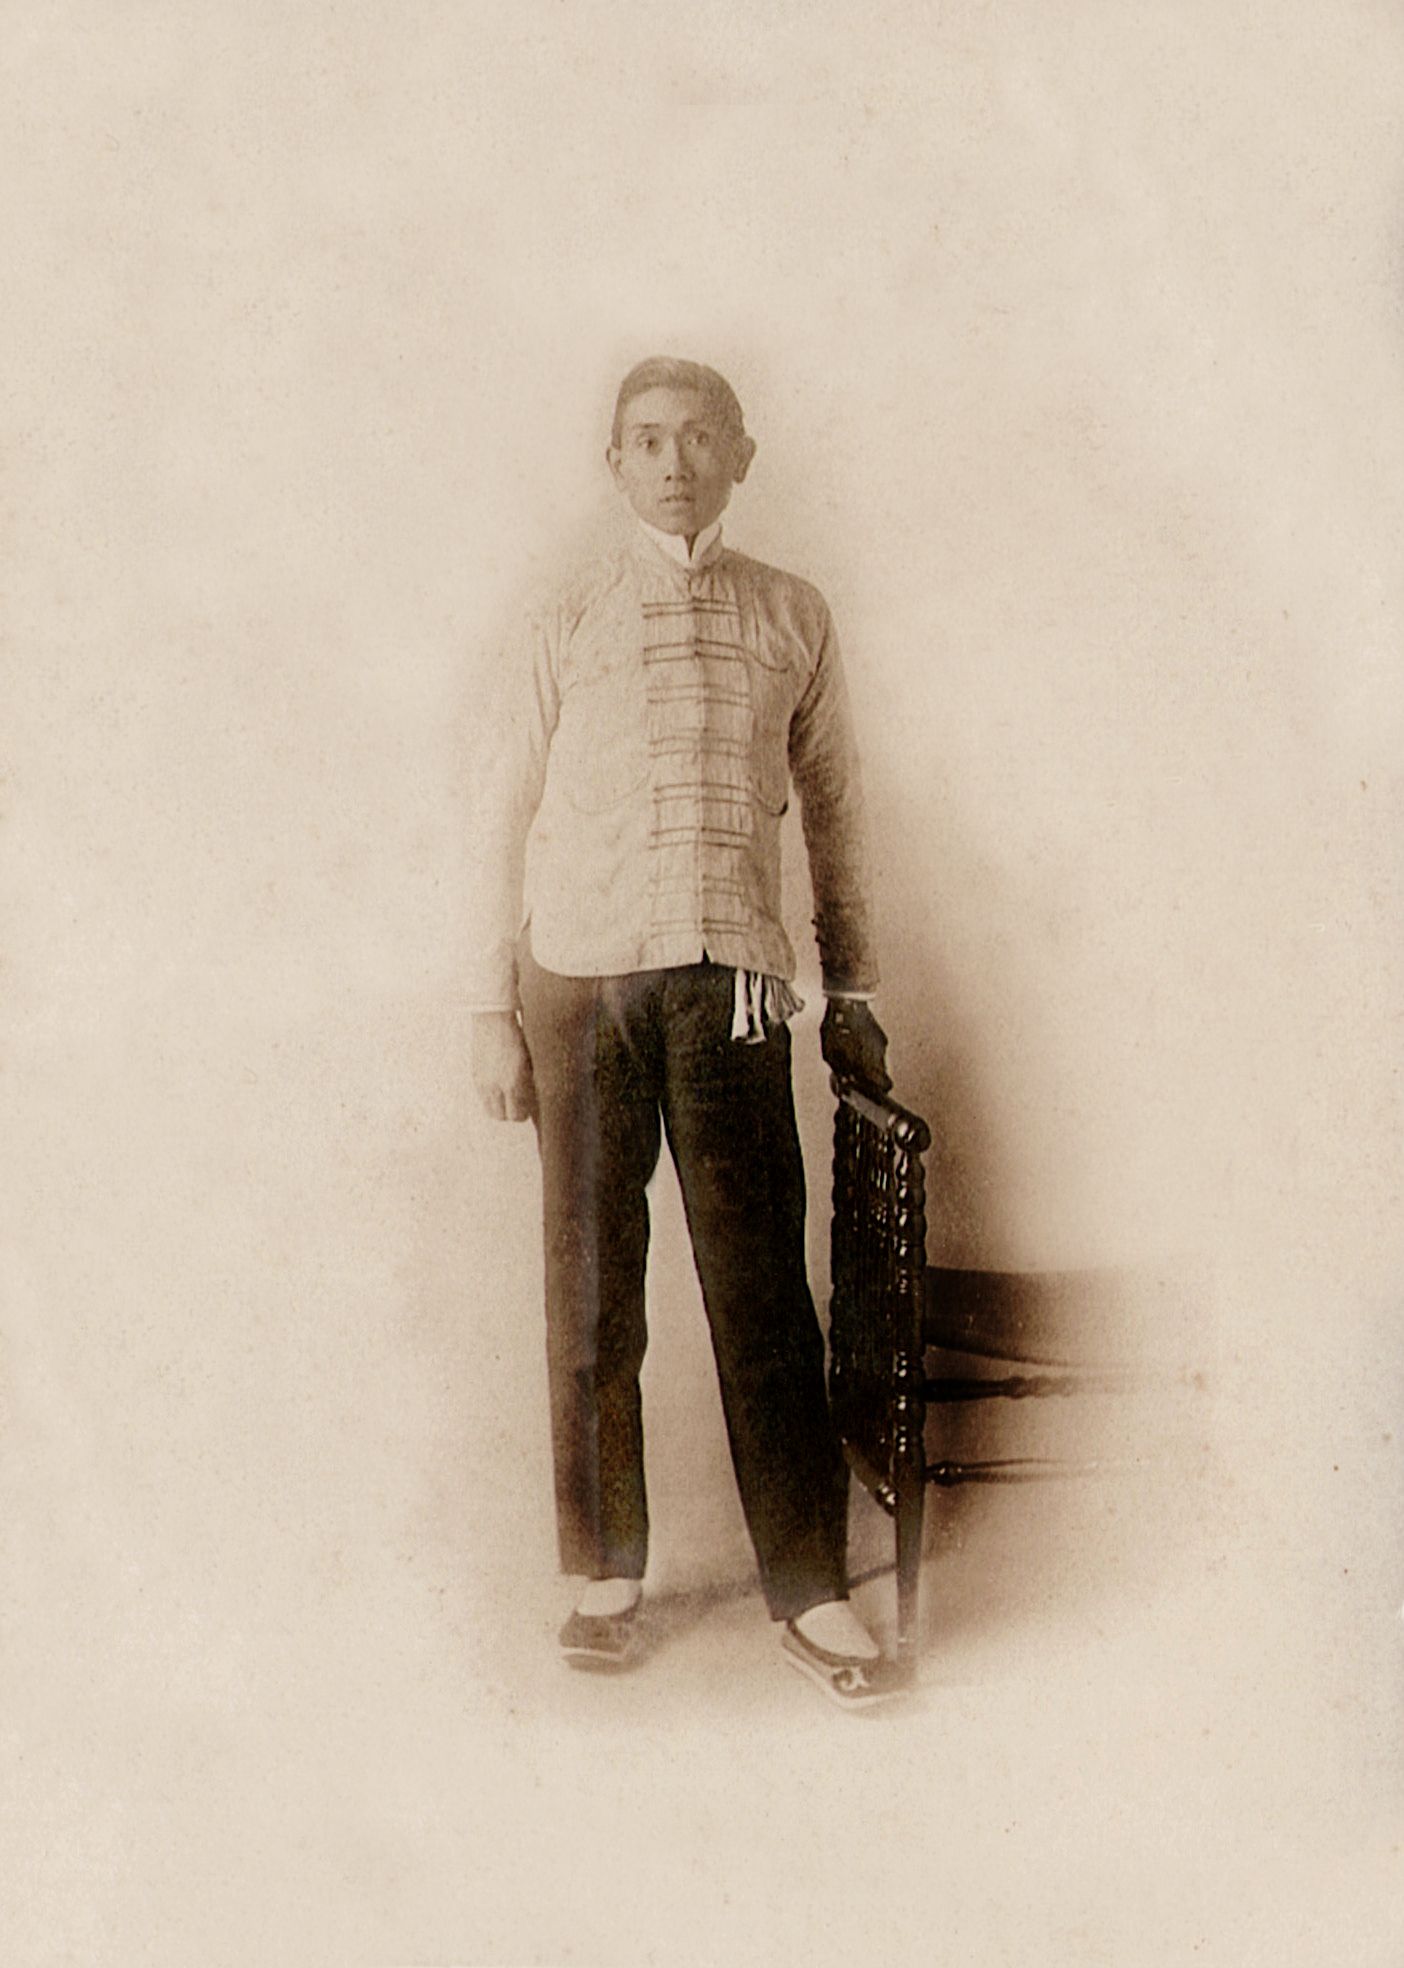 Chung T'ai P'eng (aka Grandpa Robbie), "fresh off the boat," ca. 1889. Having escaped his own beheading, he landed in America and with his first taste of freedom, cut the hated queue from his head.